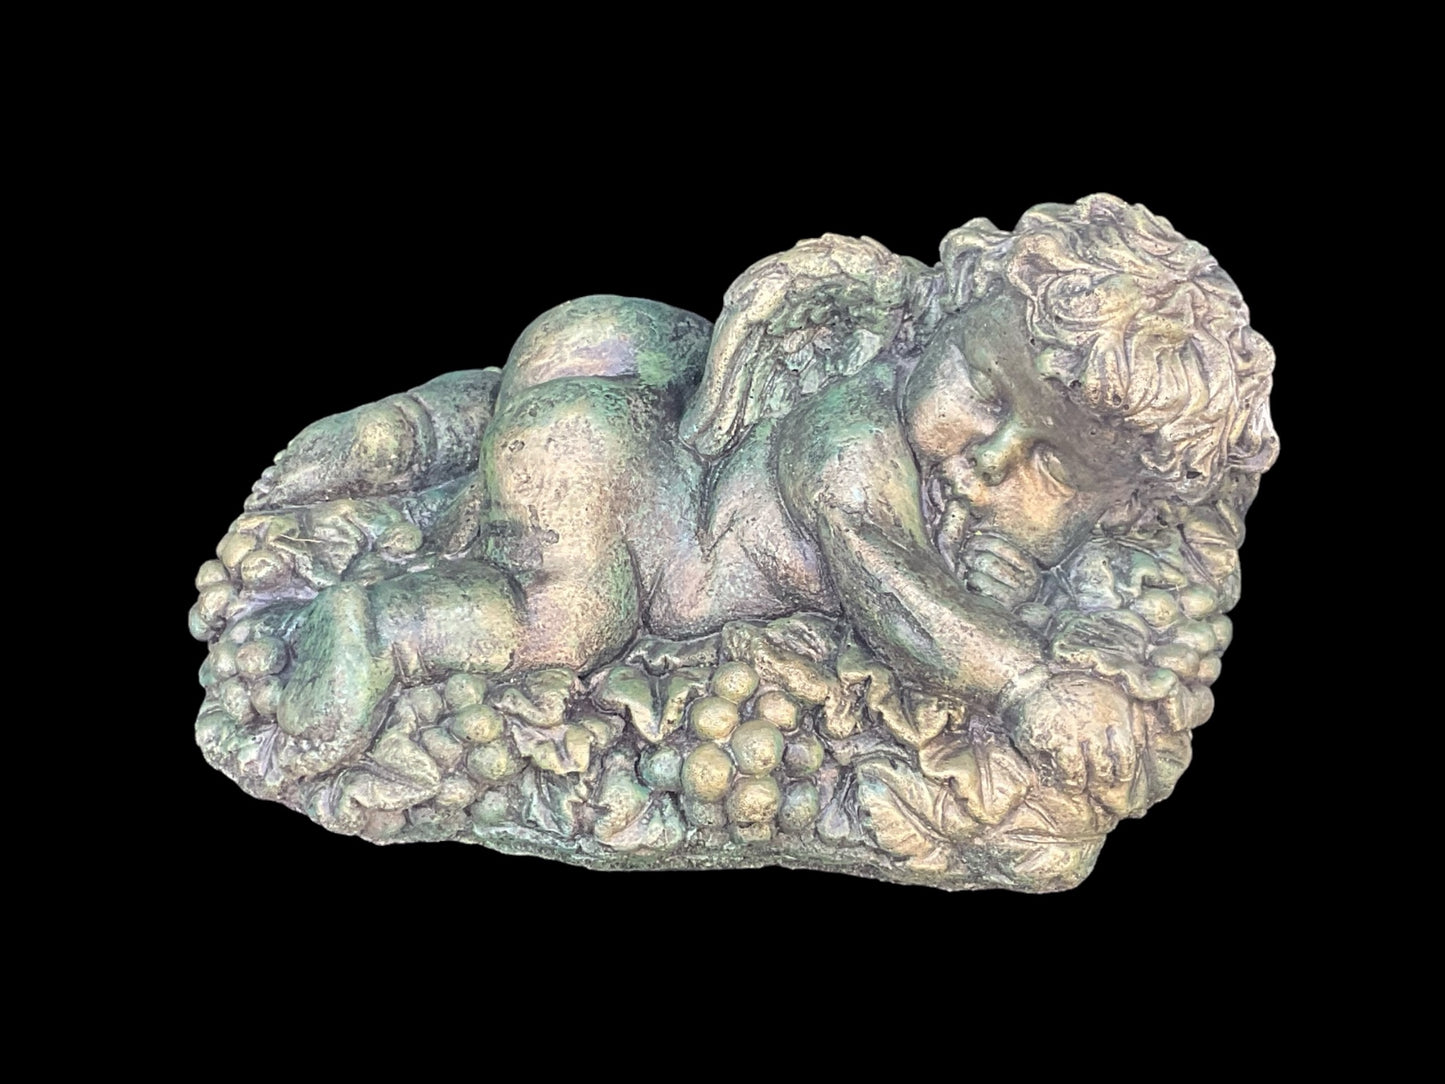 Cherub - large with grapes - 1